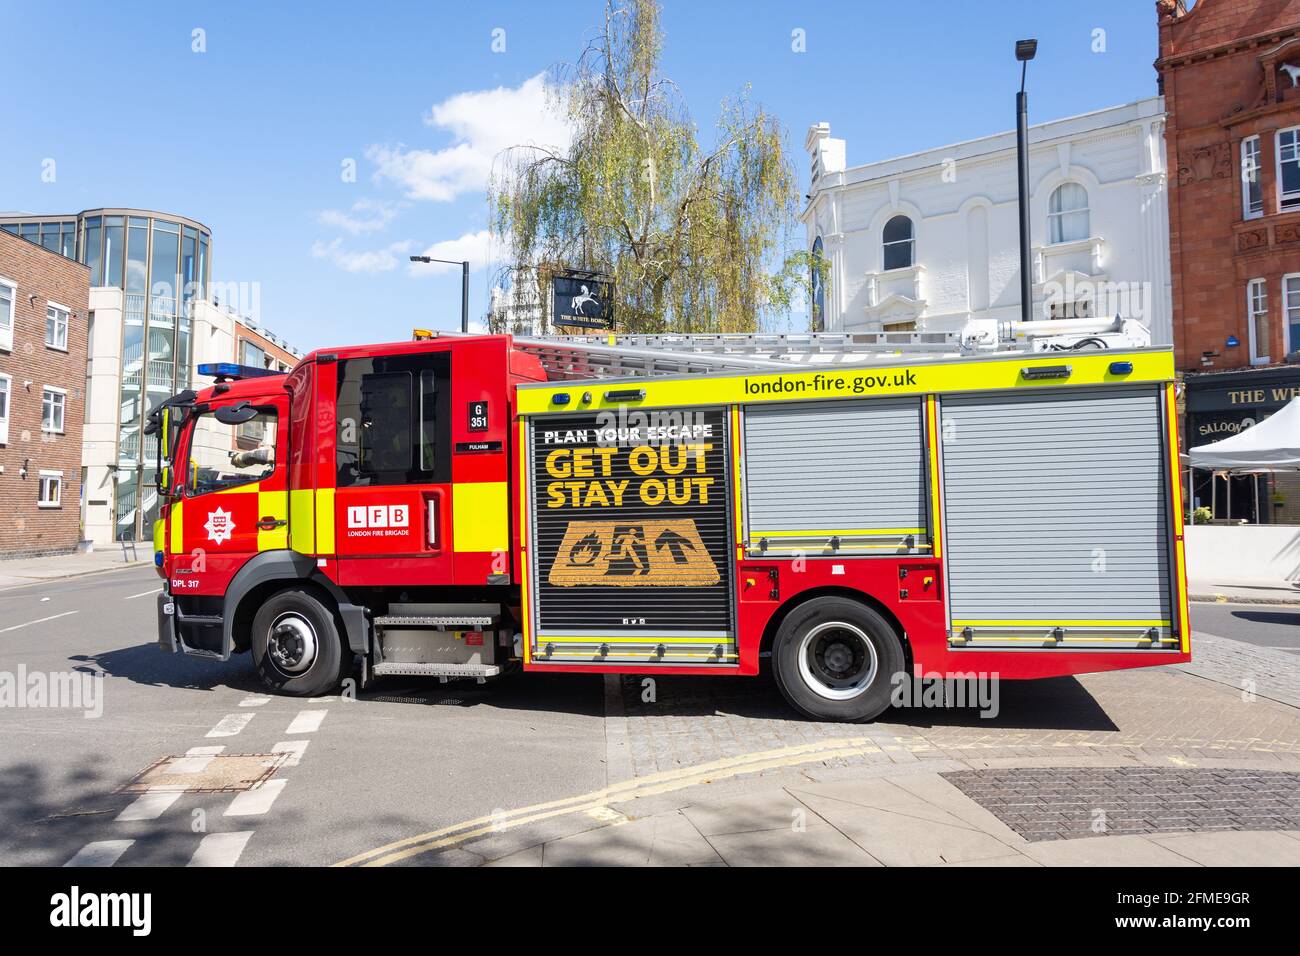 London Fire Brigade engine on call, Parsons Green, London Borough of Hammersmith and Fulham, Greater London, England, United Kingdom Stock Photo